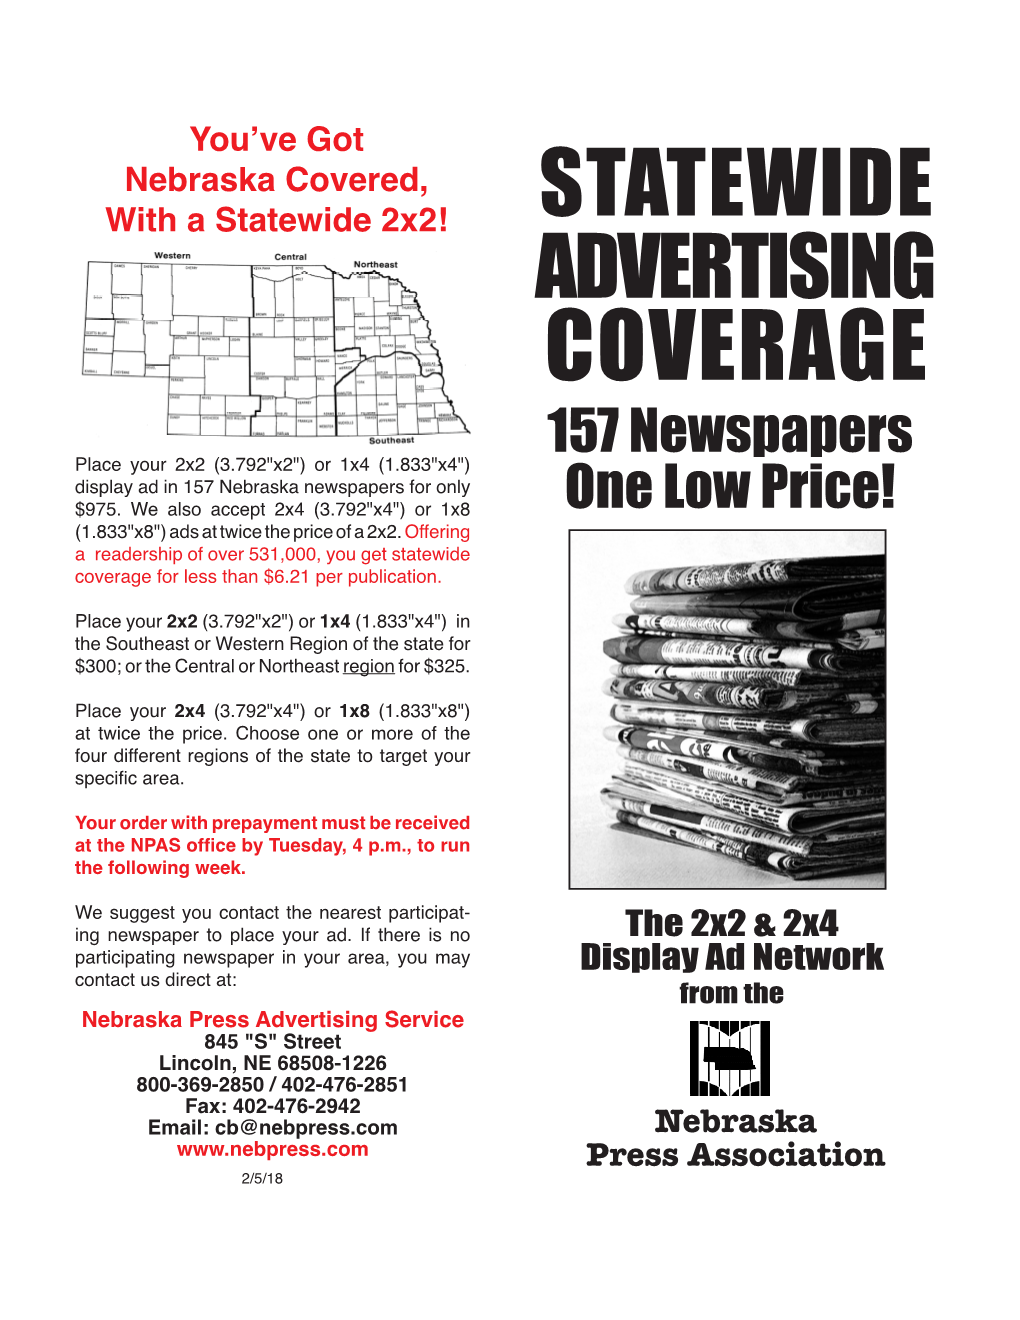 You've Got Nebraska Covered, with a Statewide 2X2!